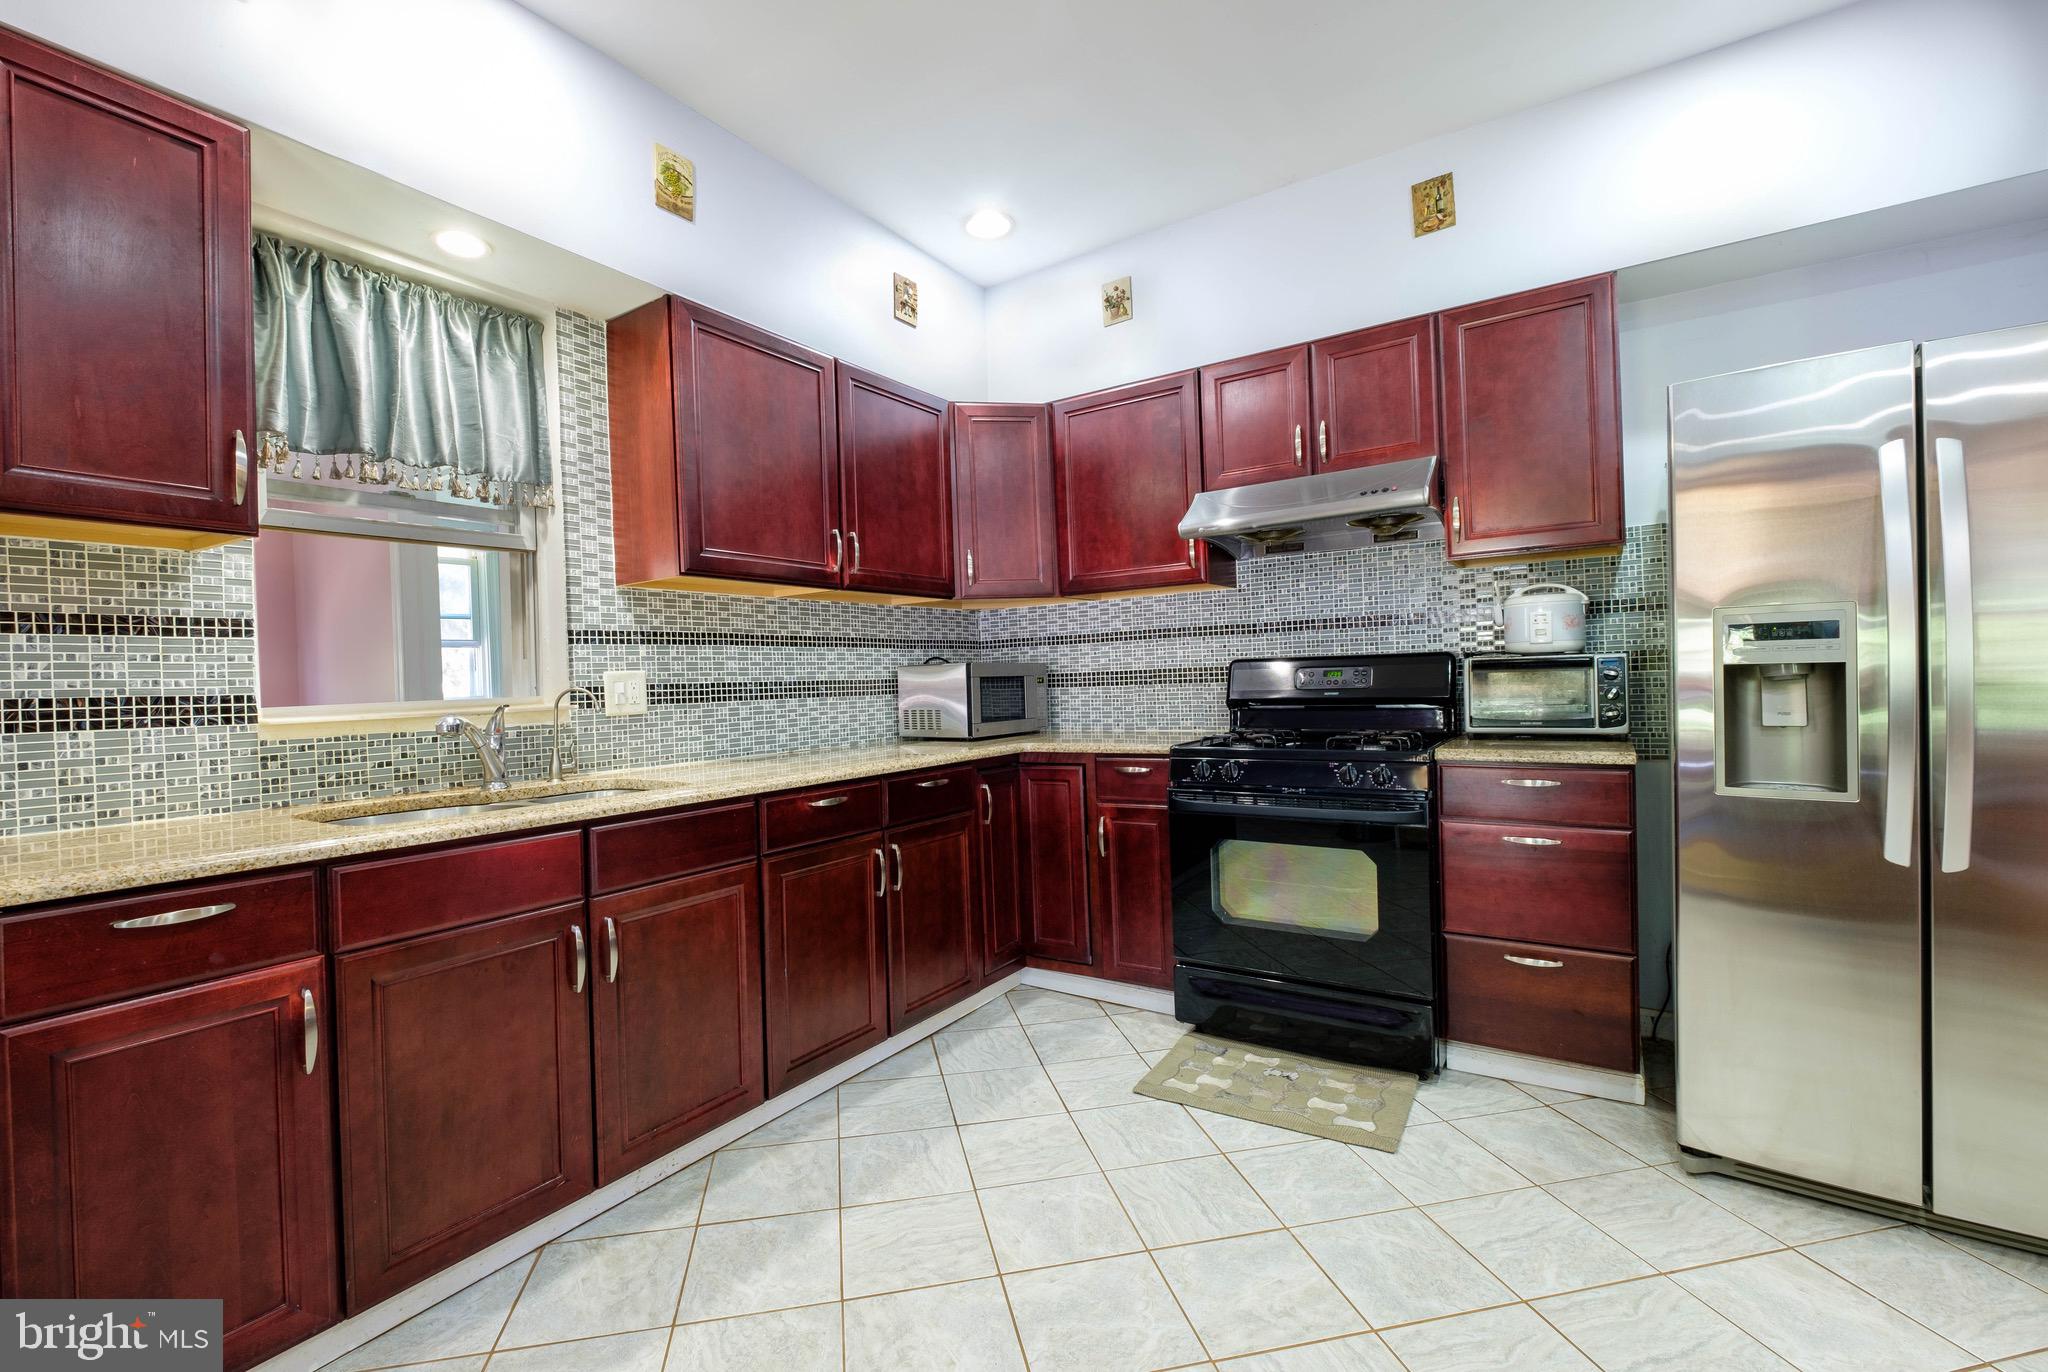 a kitchen with stainless steel appliances granite countertop a refrigerator a stove a sink and dishwasher